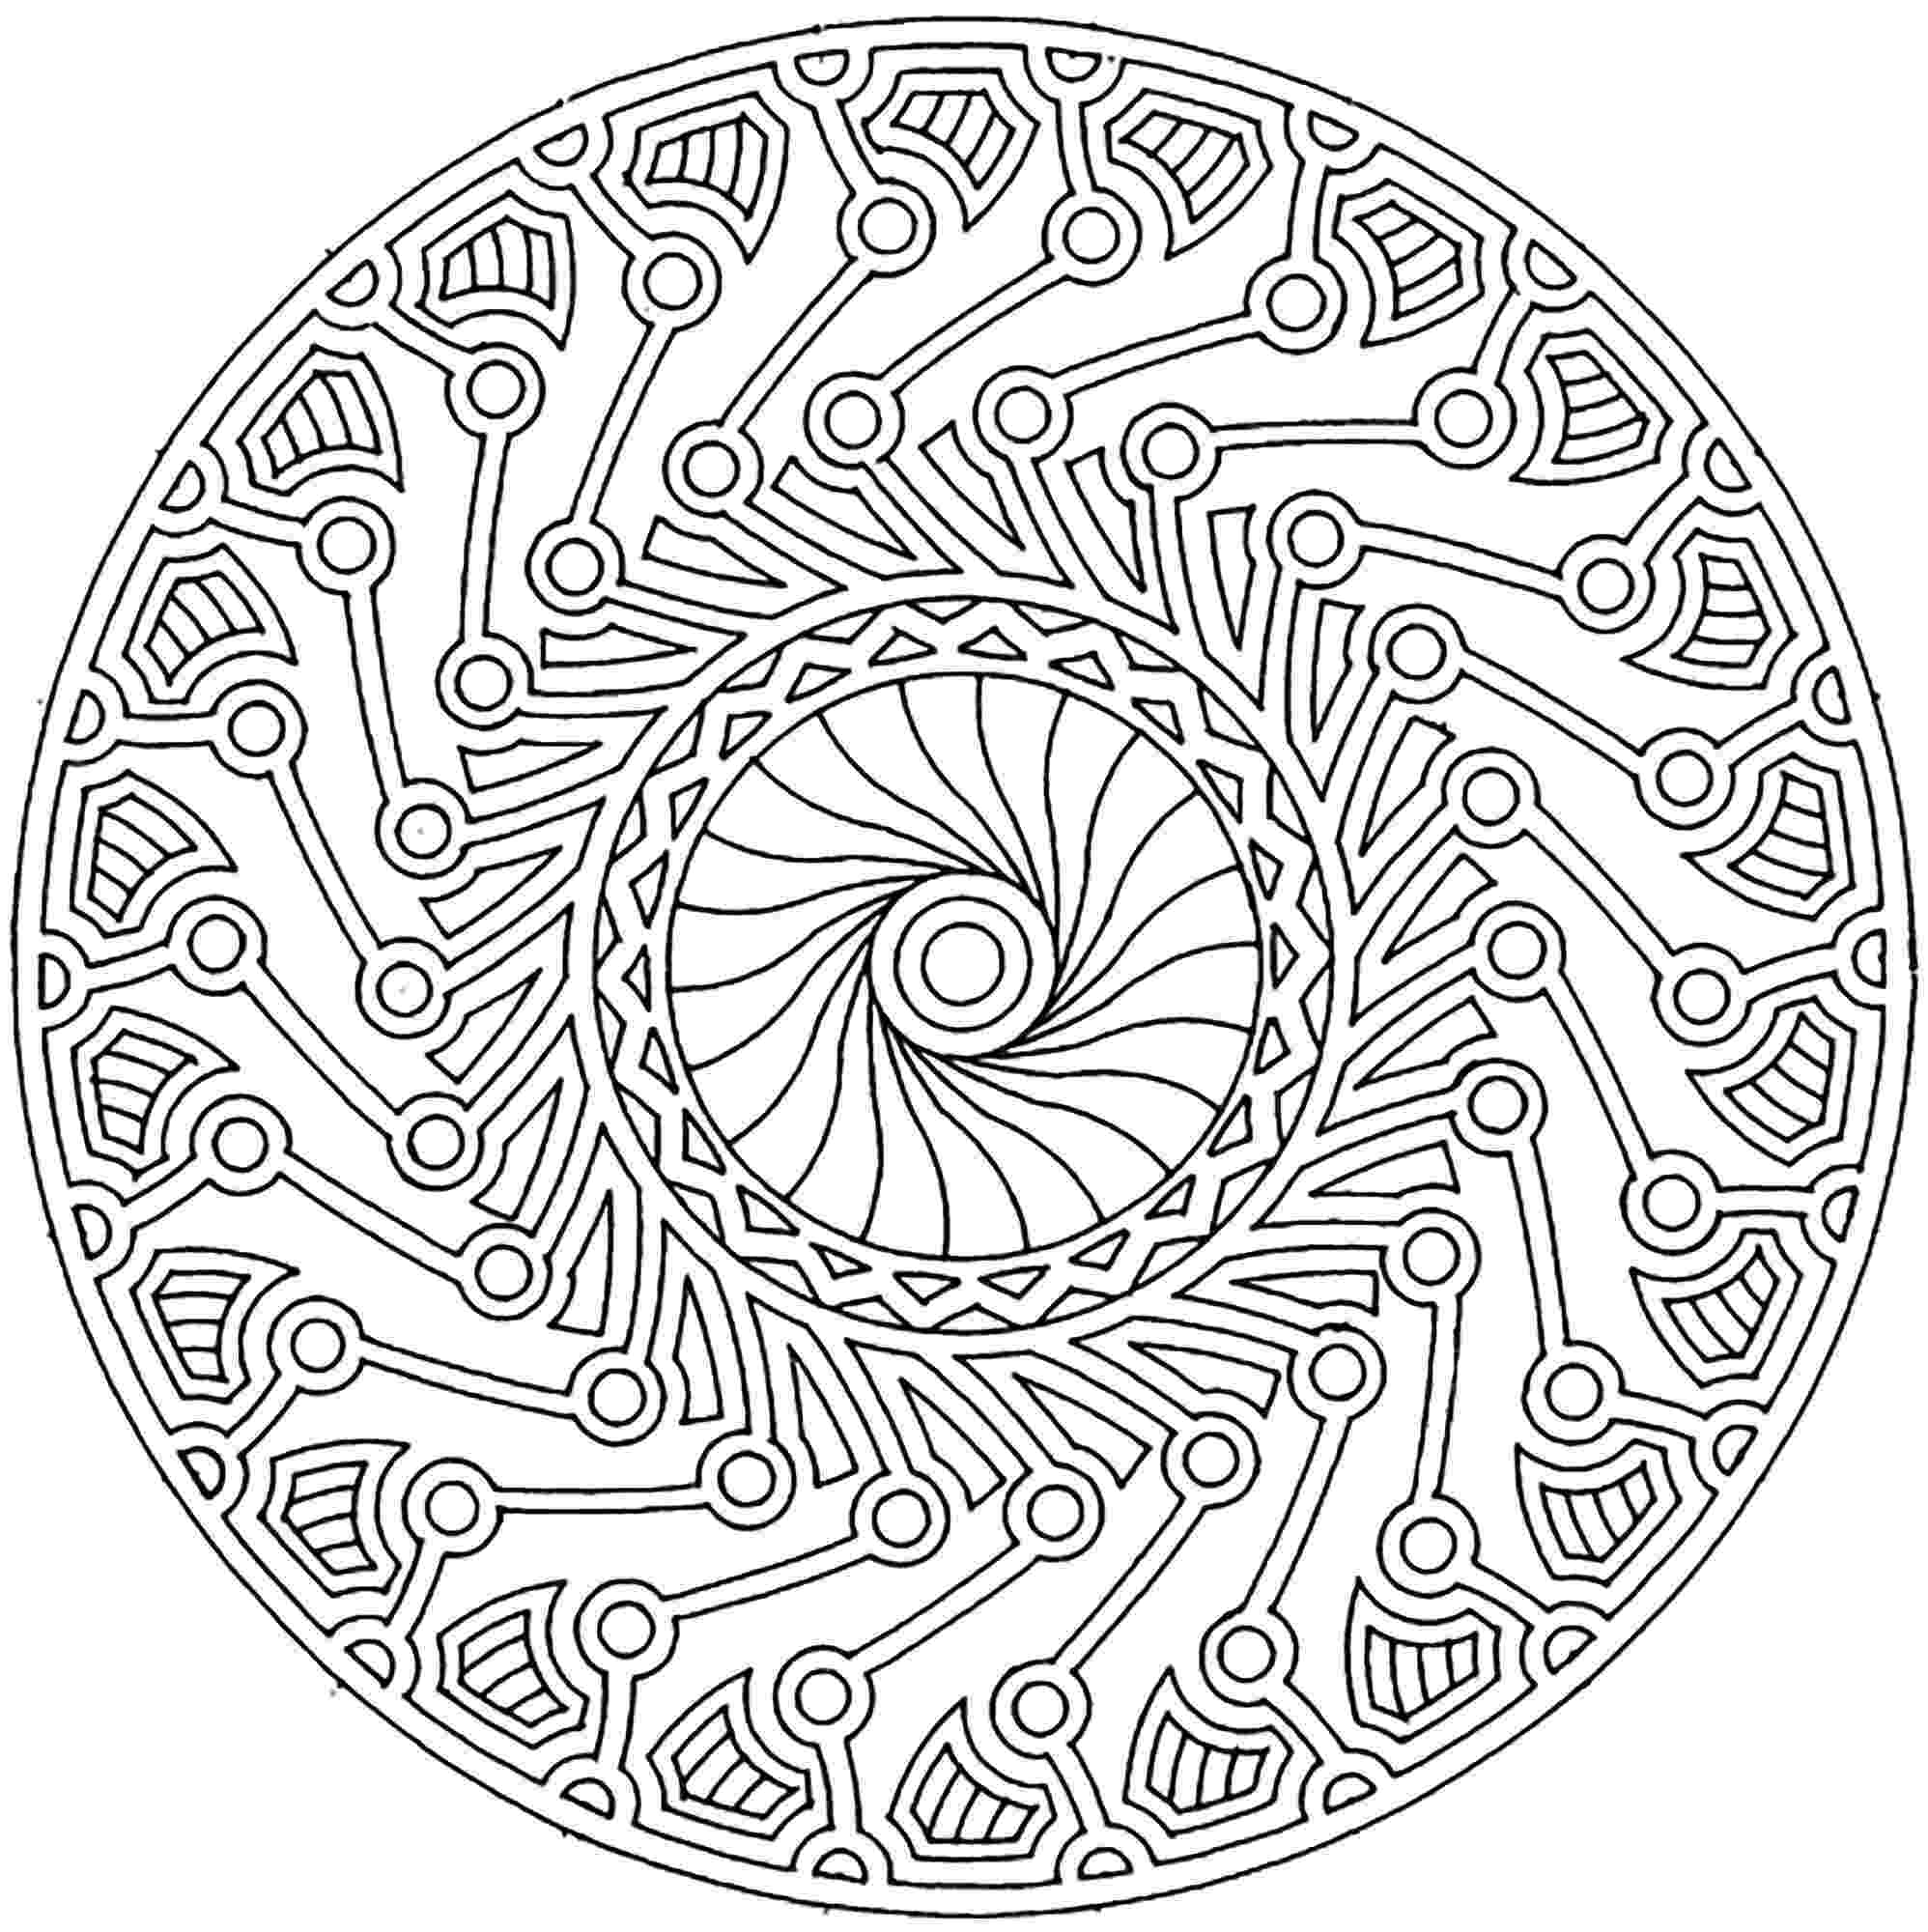 mandala coloring pages for adults free 100 best printable mandalas to color free images on pages free mandala coloring for adults 